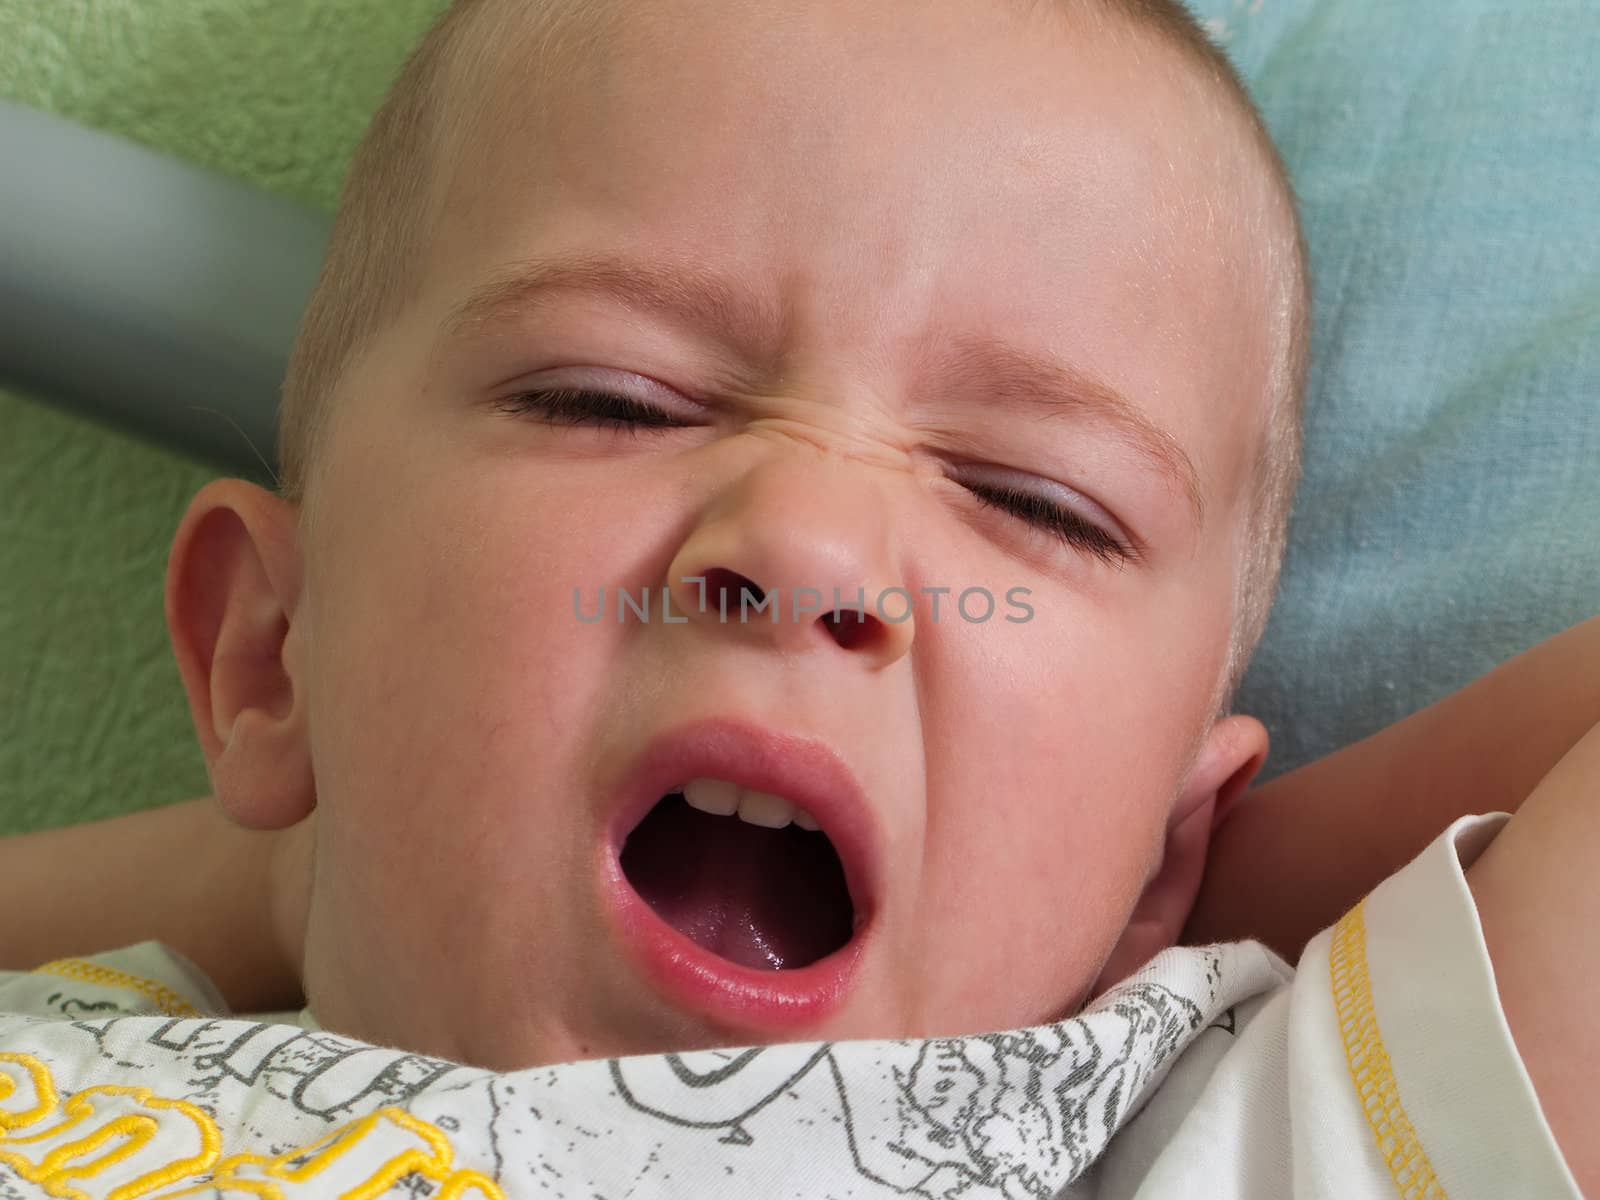 Little tired human child yawning cute face